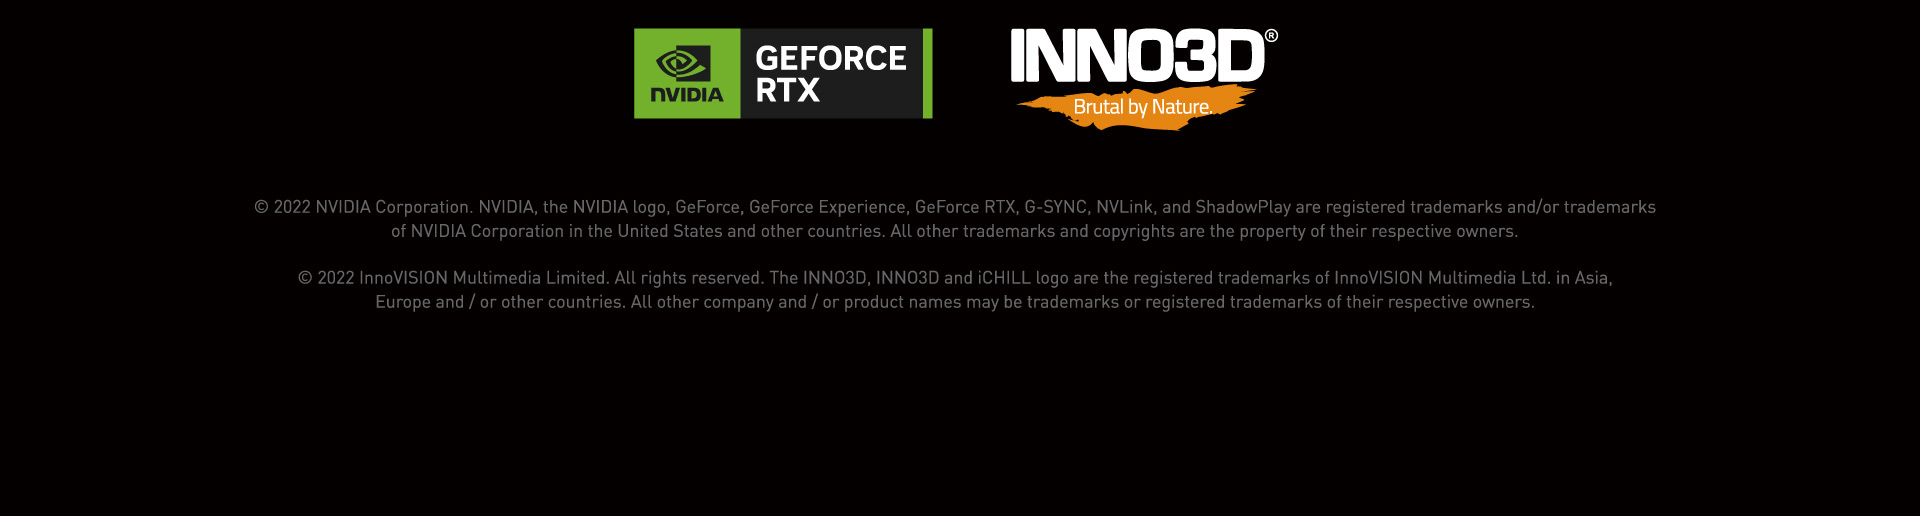 © 2022 NVIDIA Corporation. NVIDIA, the NVIDIA logo, GeForce, GeForce Experience, GeForce RTX, G-SYNC, NVLink, and ShadowPlay are registered trademarks and/or trademarks
of NVIDIA Corporation in the United States and other countries. All other trademarks and copyrights are the property of their respective owners.© 2022 InnoVISION Multimedia Limited. All rights reserved. The INNO3D, INNO3D and iCHILL logo are the registered trademarks of InnoVISION Multimedia Ltd. in Asia,
Europe and / or other countries. All other company and / or product names may be trademarks or registered trademarks of their respective owners.